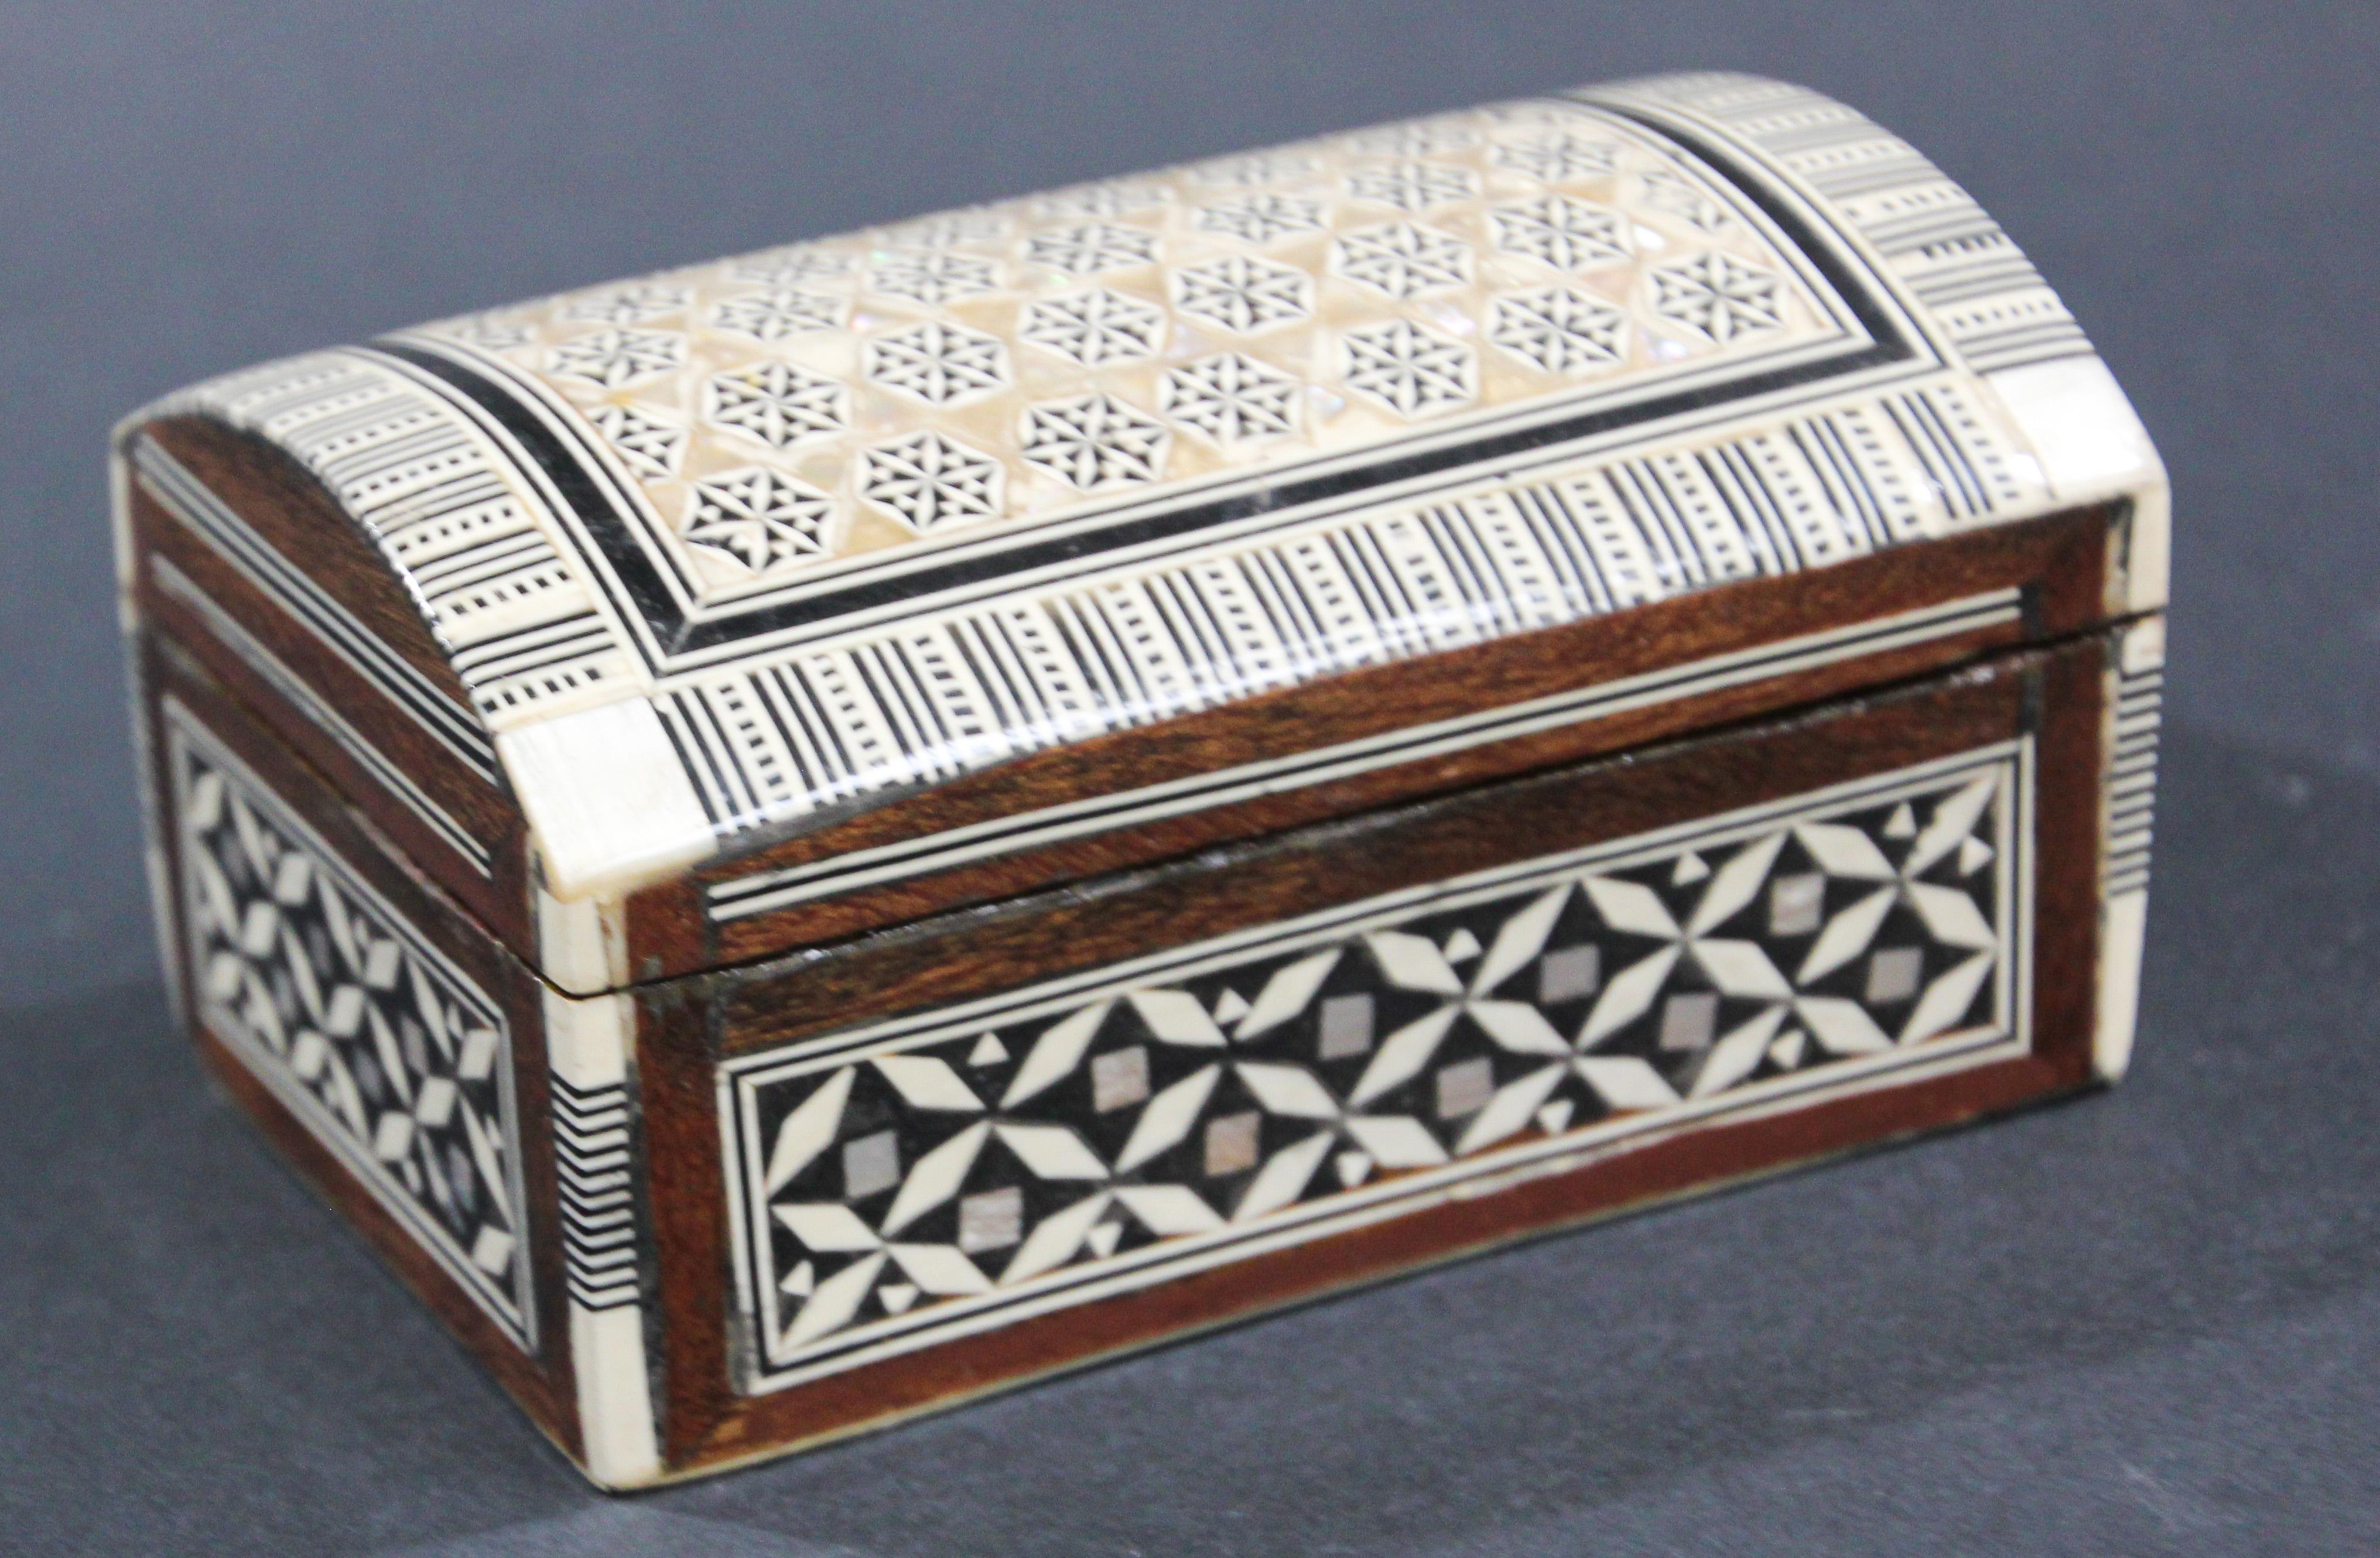 Exquisite handcrafted Middle Eastern mosaic marquetry inlaid walnut wood box.
Small box intricately decorated with Moorish motif designs which have been painstakingly inlaid with mosaic marquetry, mother of pearl and fruitwoods.
Middle Eastern,